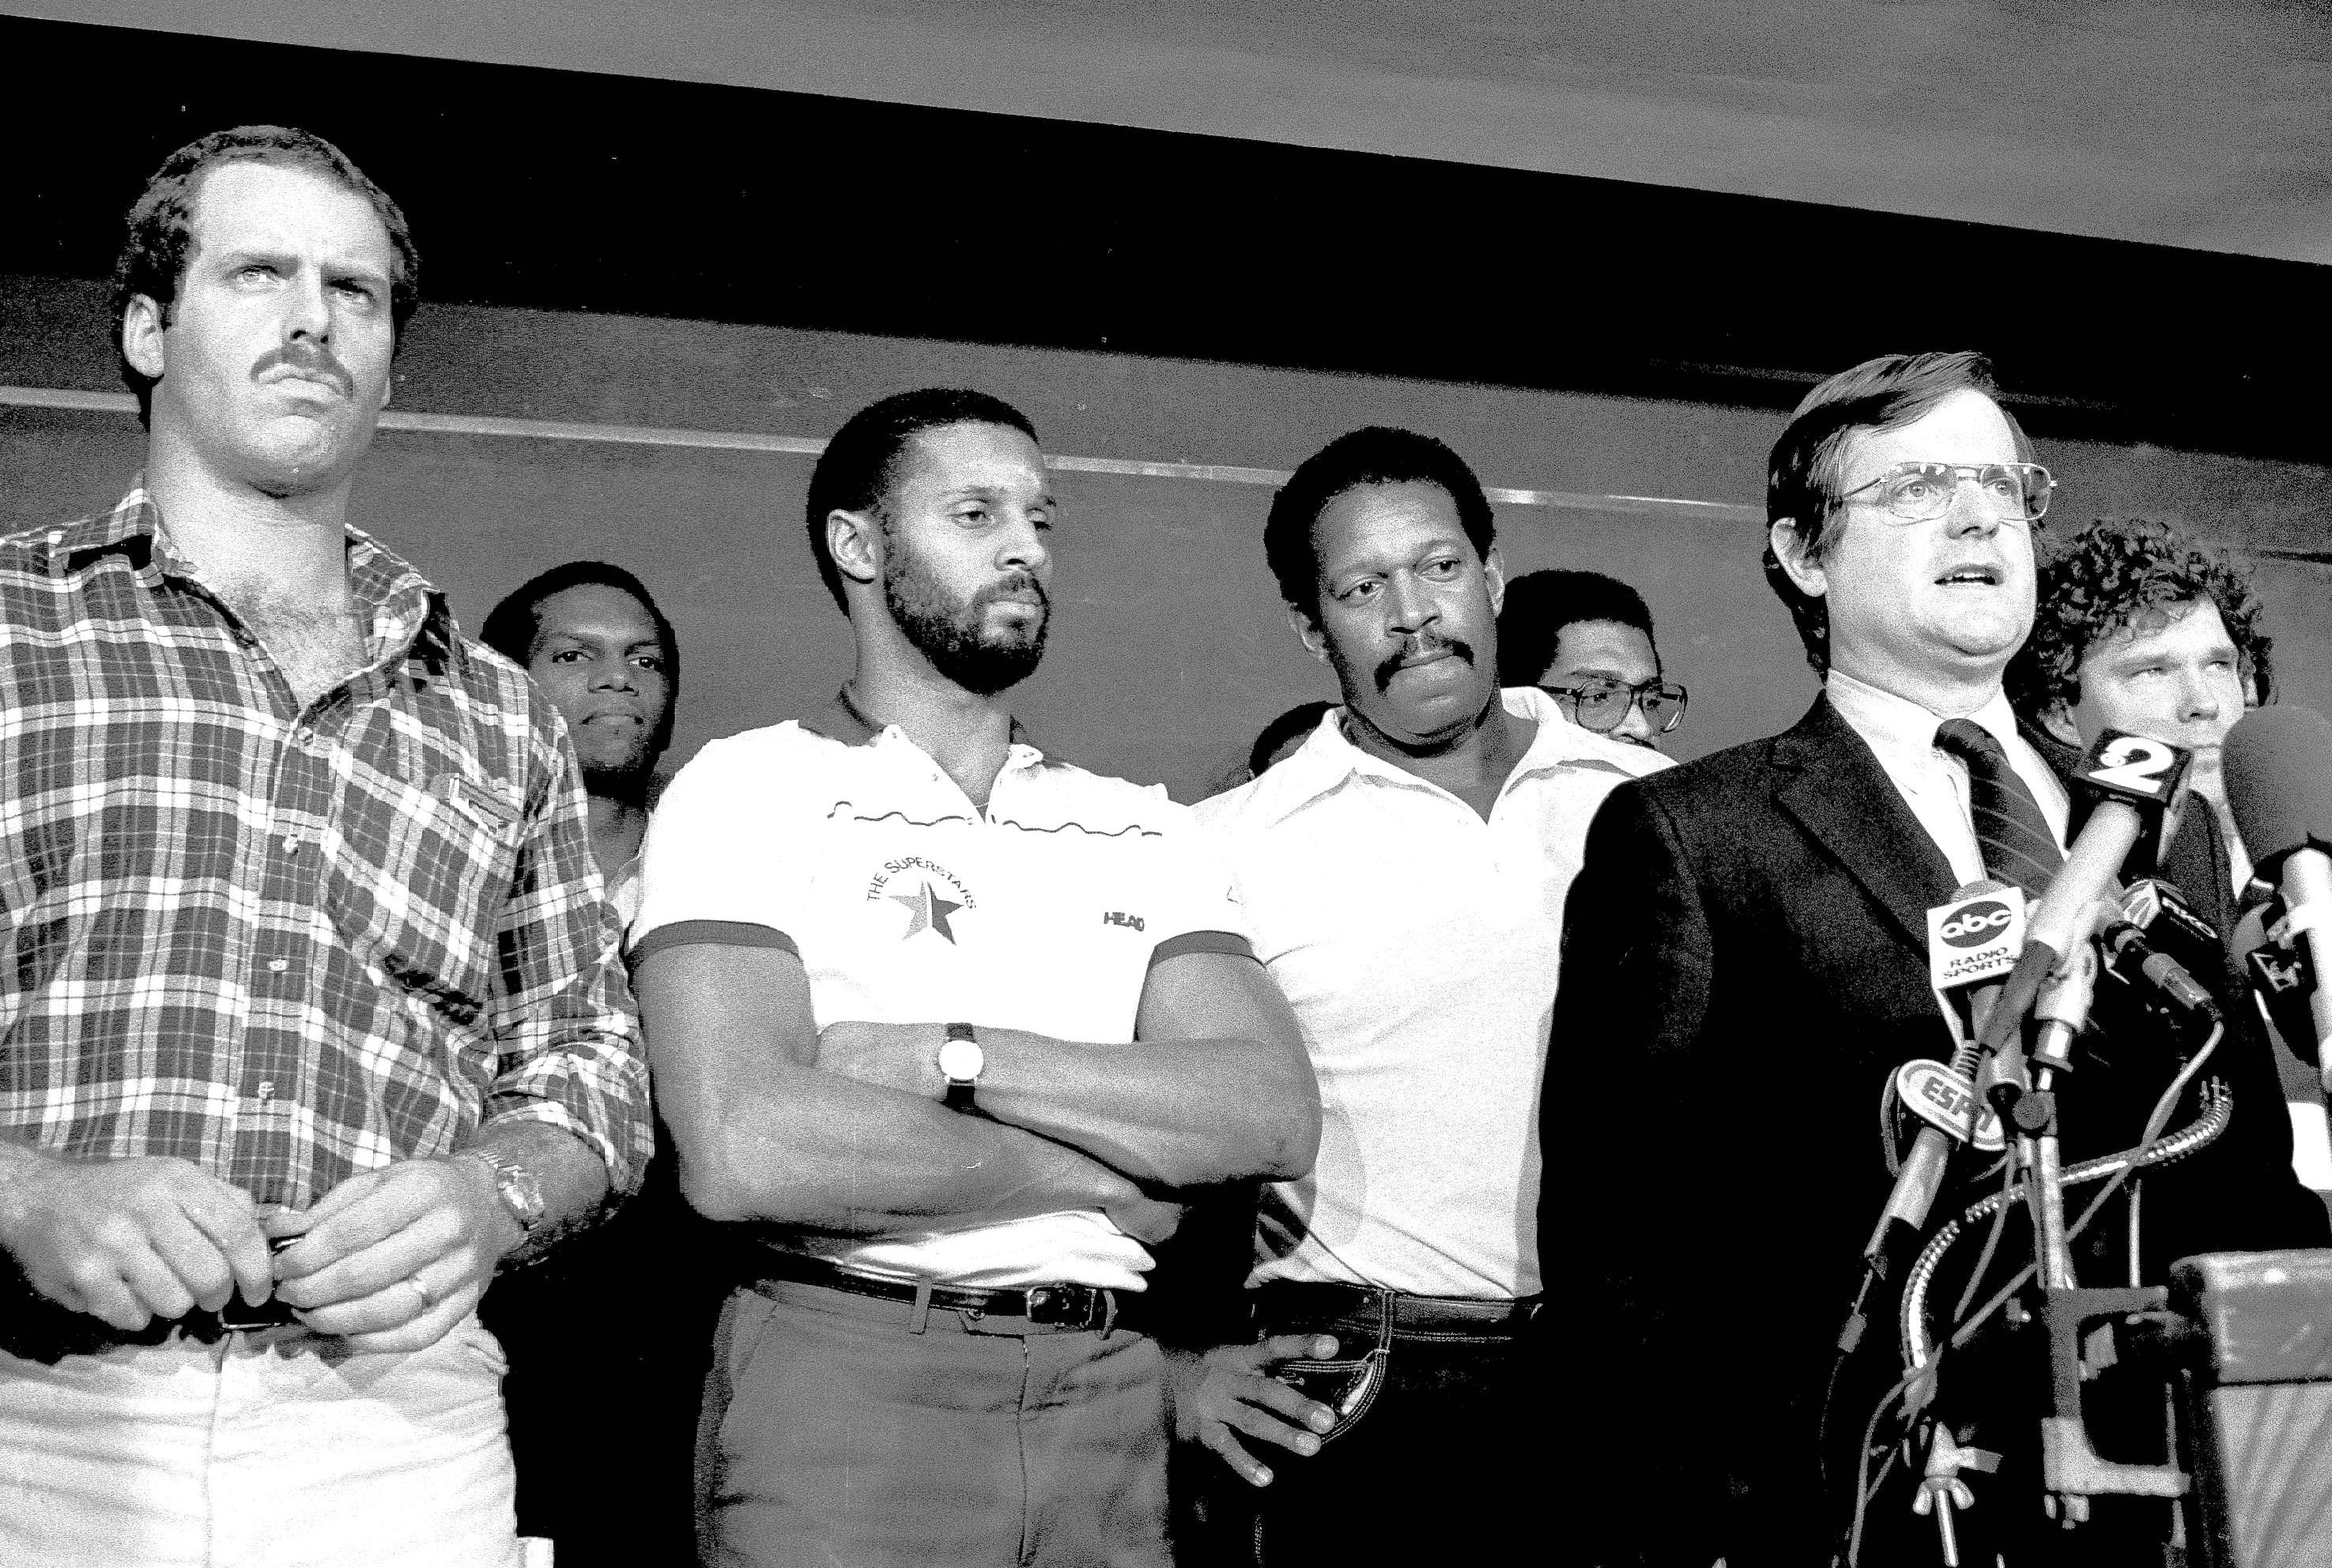 Ed Garvey, the chief negotiator for the NFL players' union, stands in front of players while speaking at a news conference in November 1982.